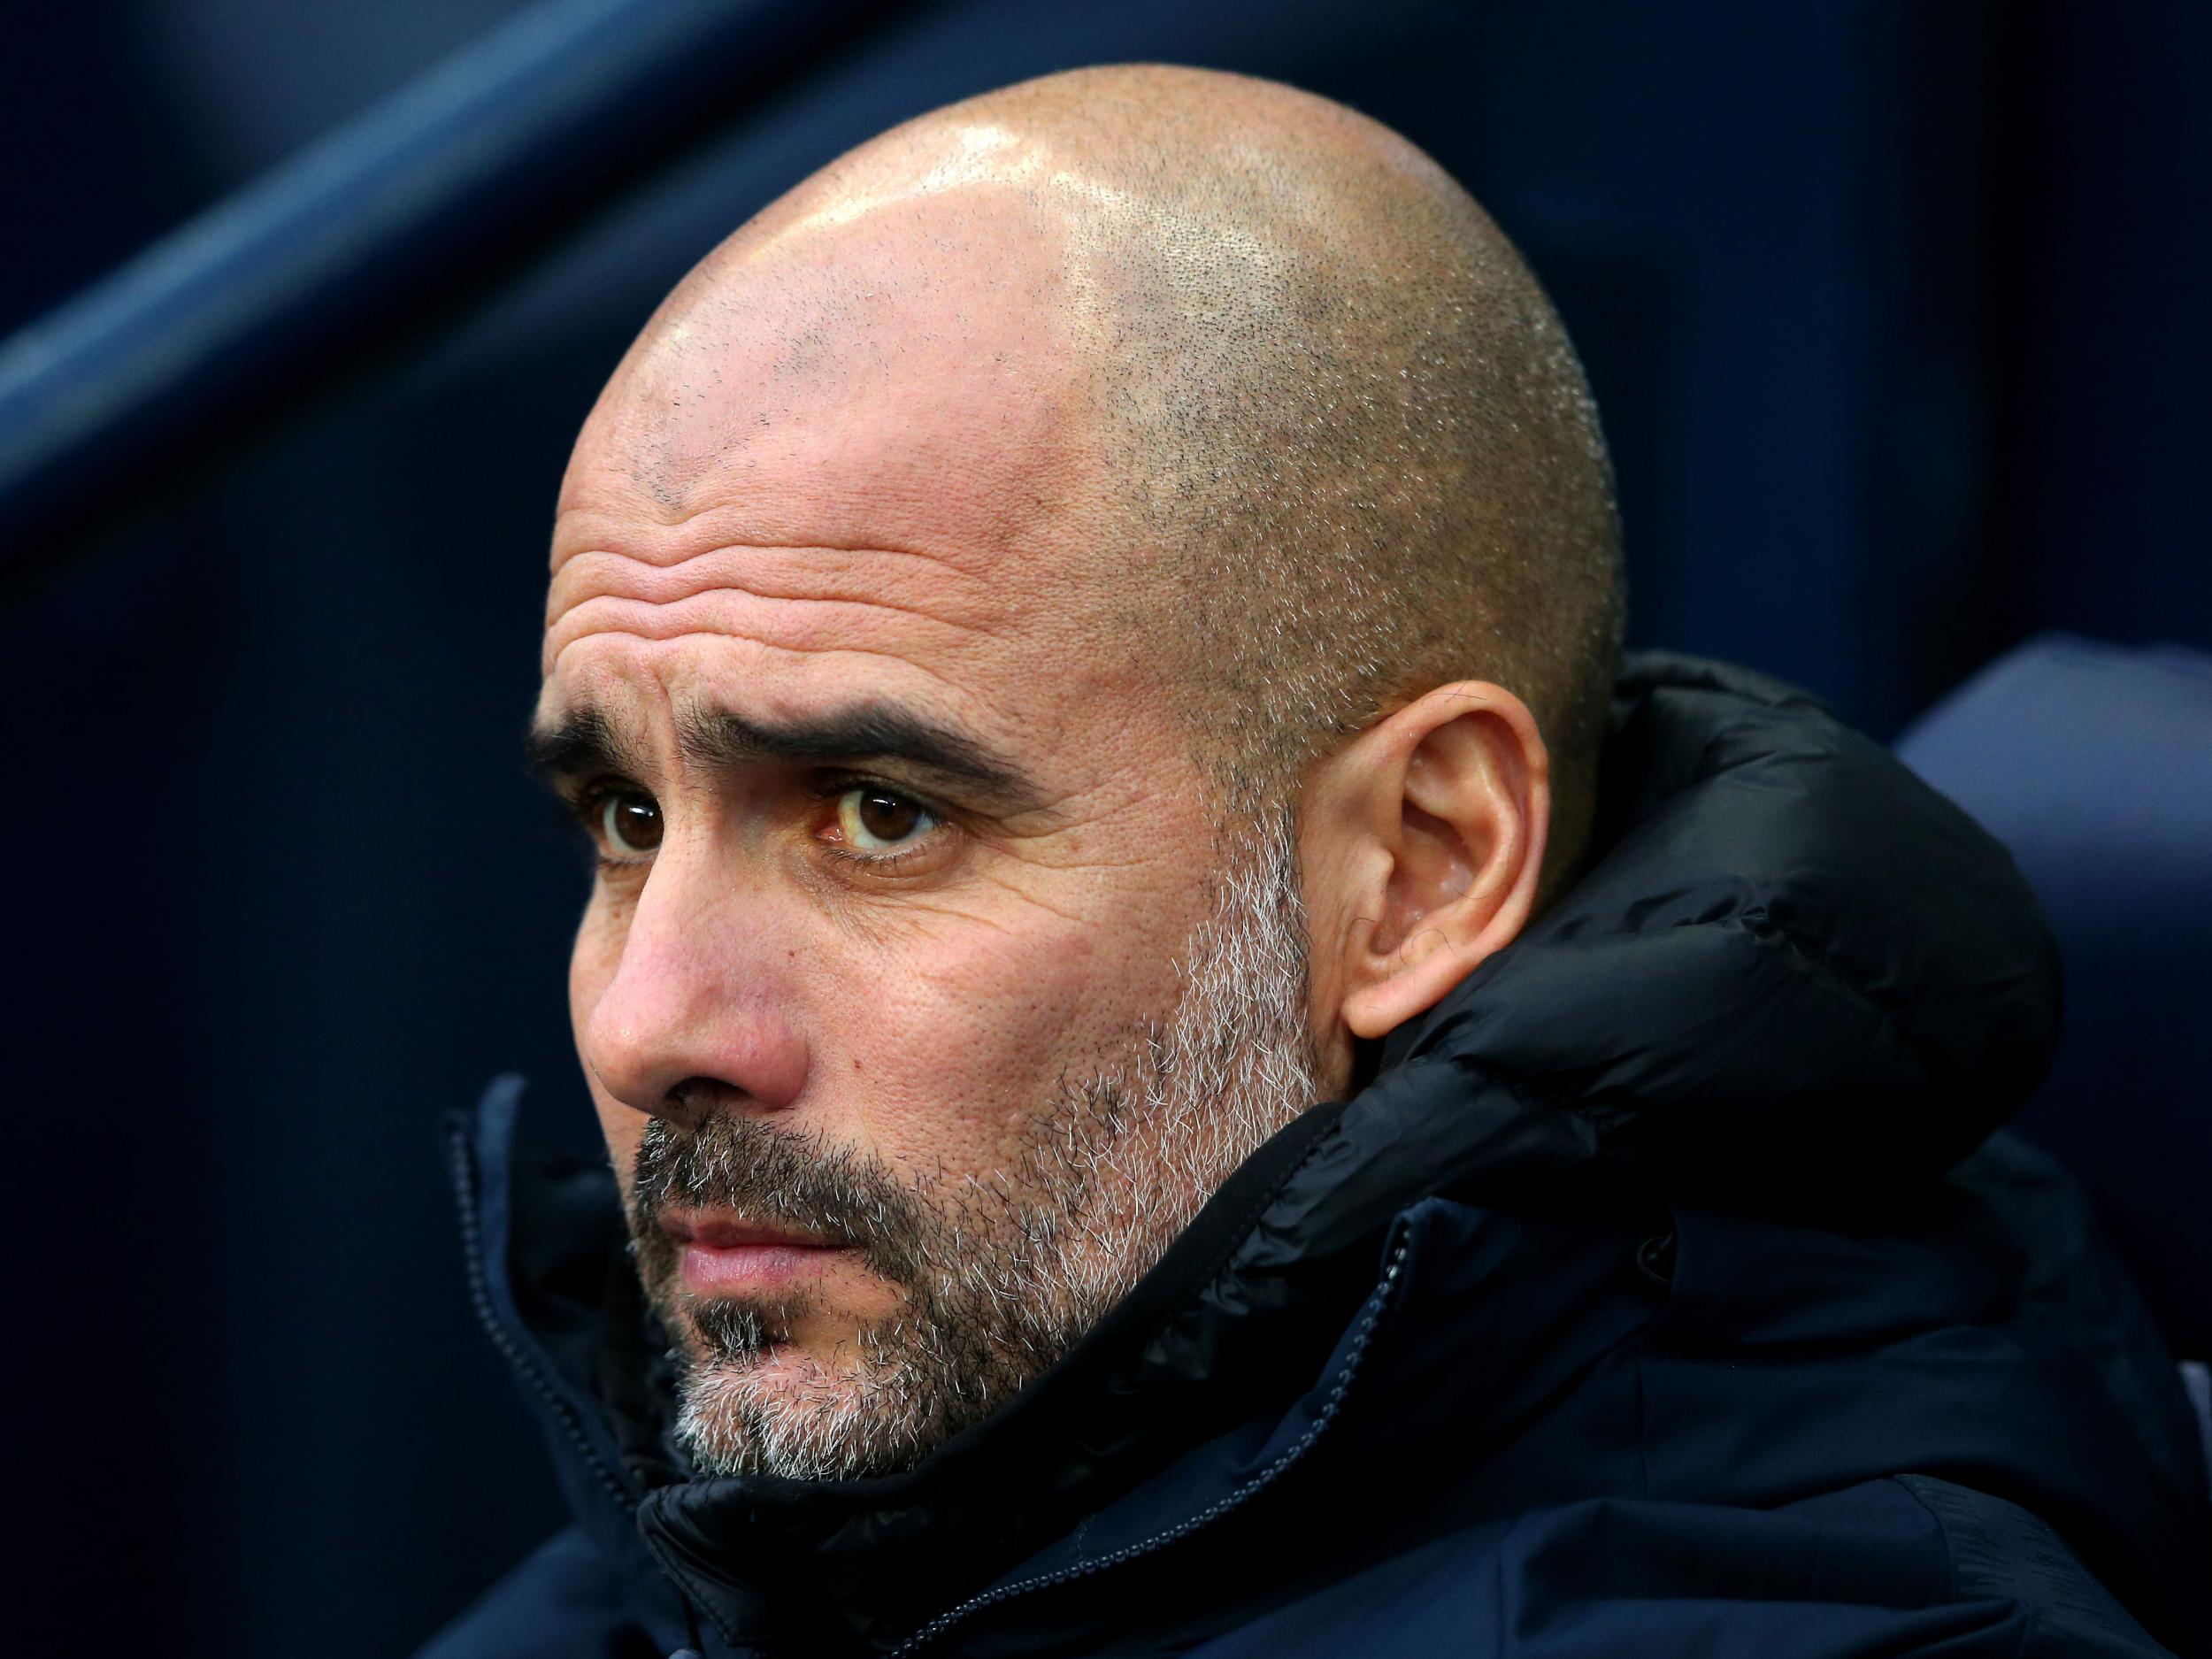 Pep Guardiola has been unable to get the Frenchman to cut down on social media